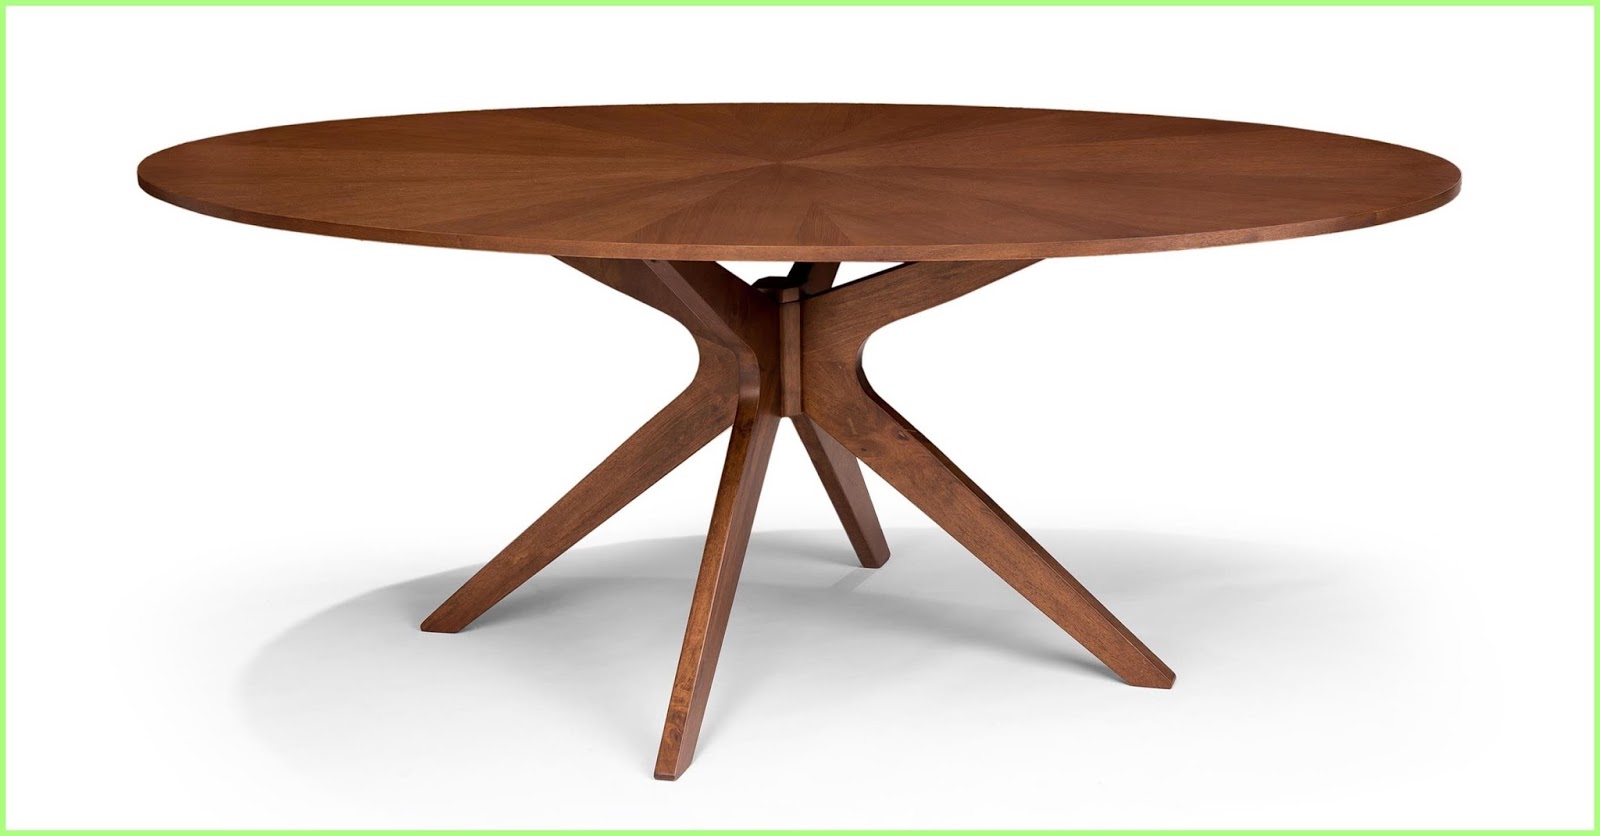 9 Oval Kitchen Tables Oval MidCentury Modern Dining Table In Brown Wood Conan Mid  Oval,Kitchen,Tables